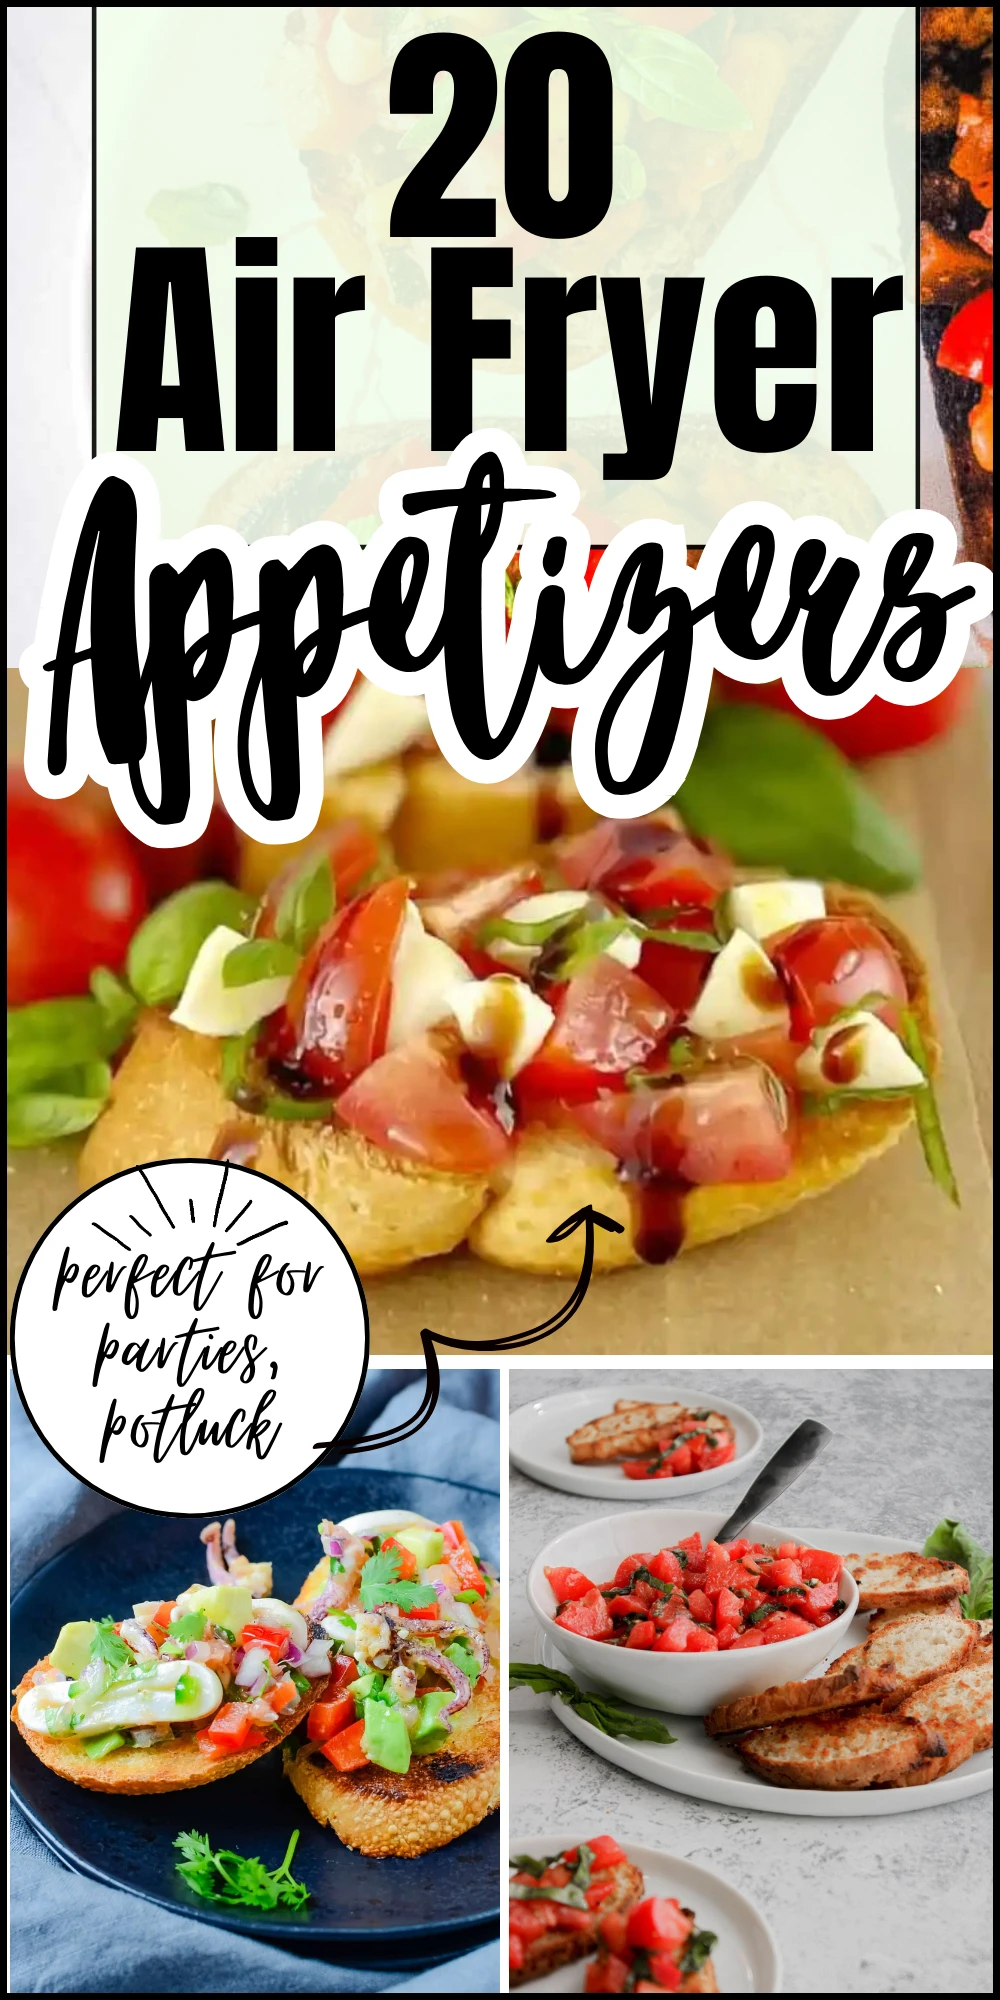 air fryer appetizers pin collage with text.